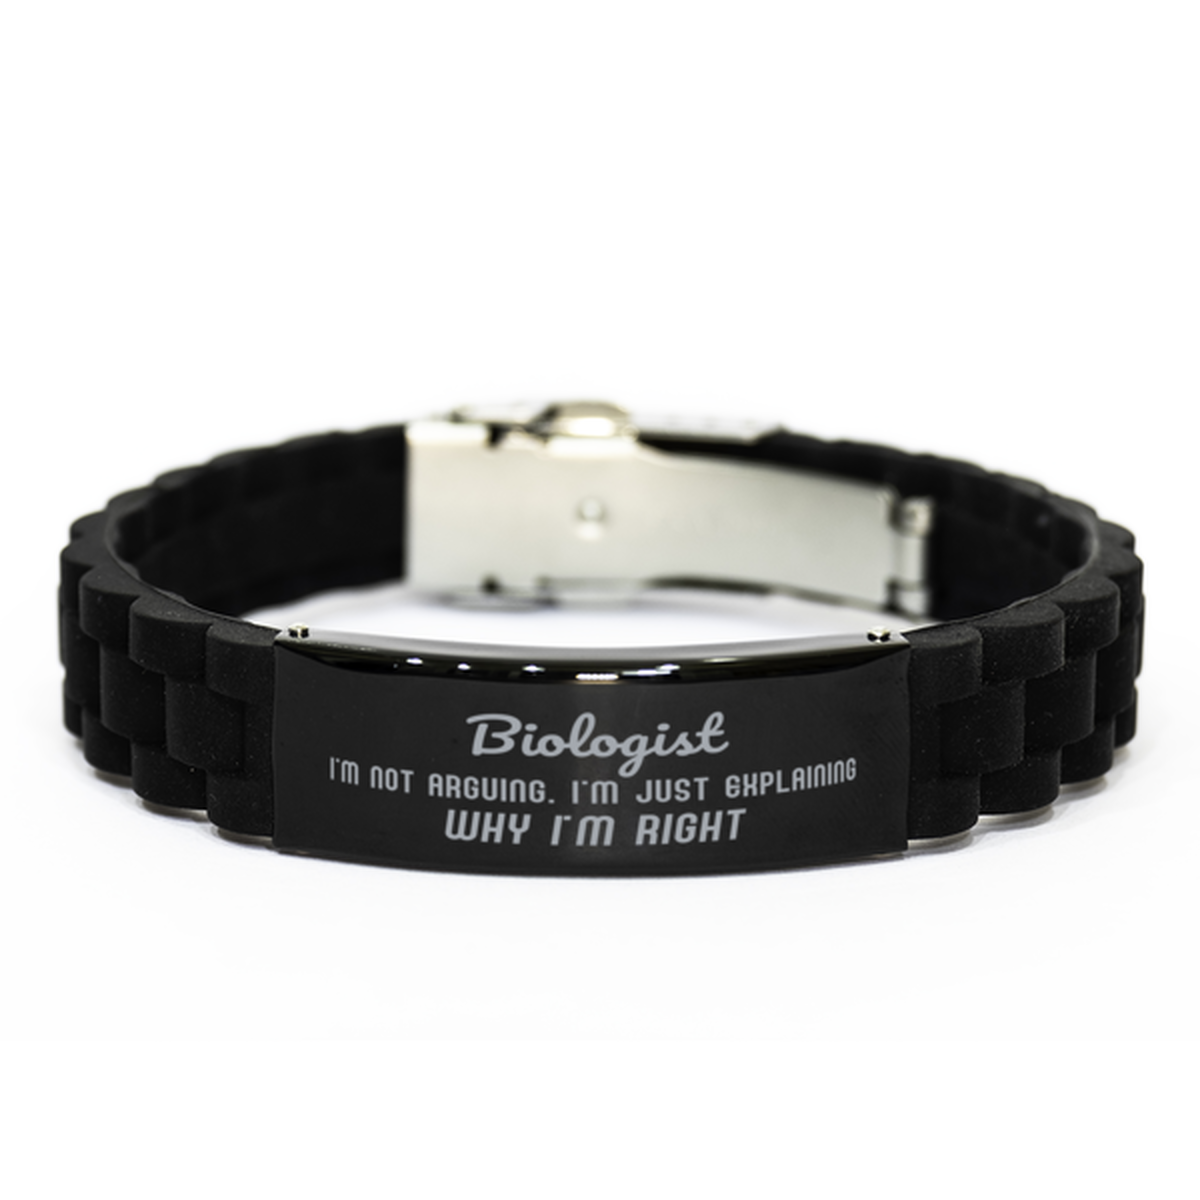 Biologist I'm not Arguing. I'm Just Explaining Why I'm RIGHT Black Glidelock Clasp Bracelet, Funny Saying Quote Biologist Gifts For Biologist Graduation Birthday Christmas Gifts for Men Women Coworker